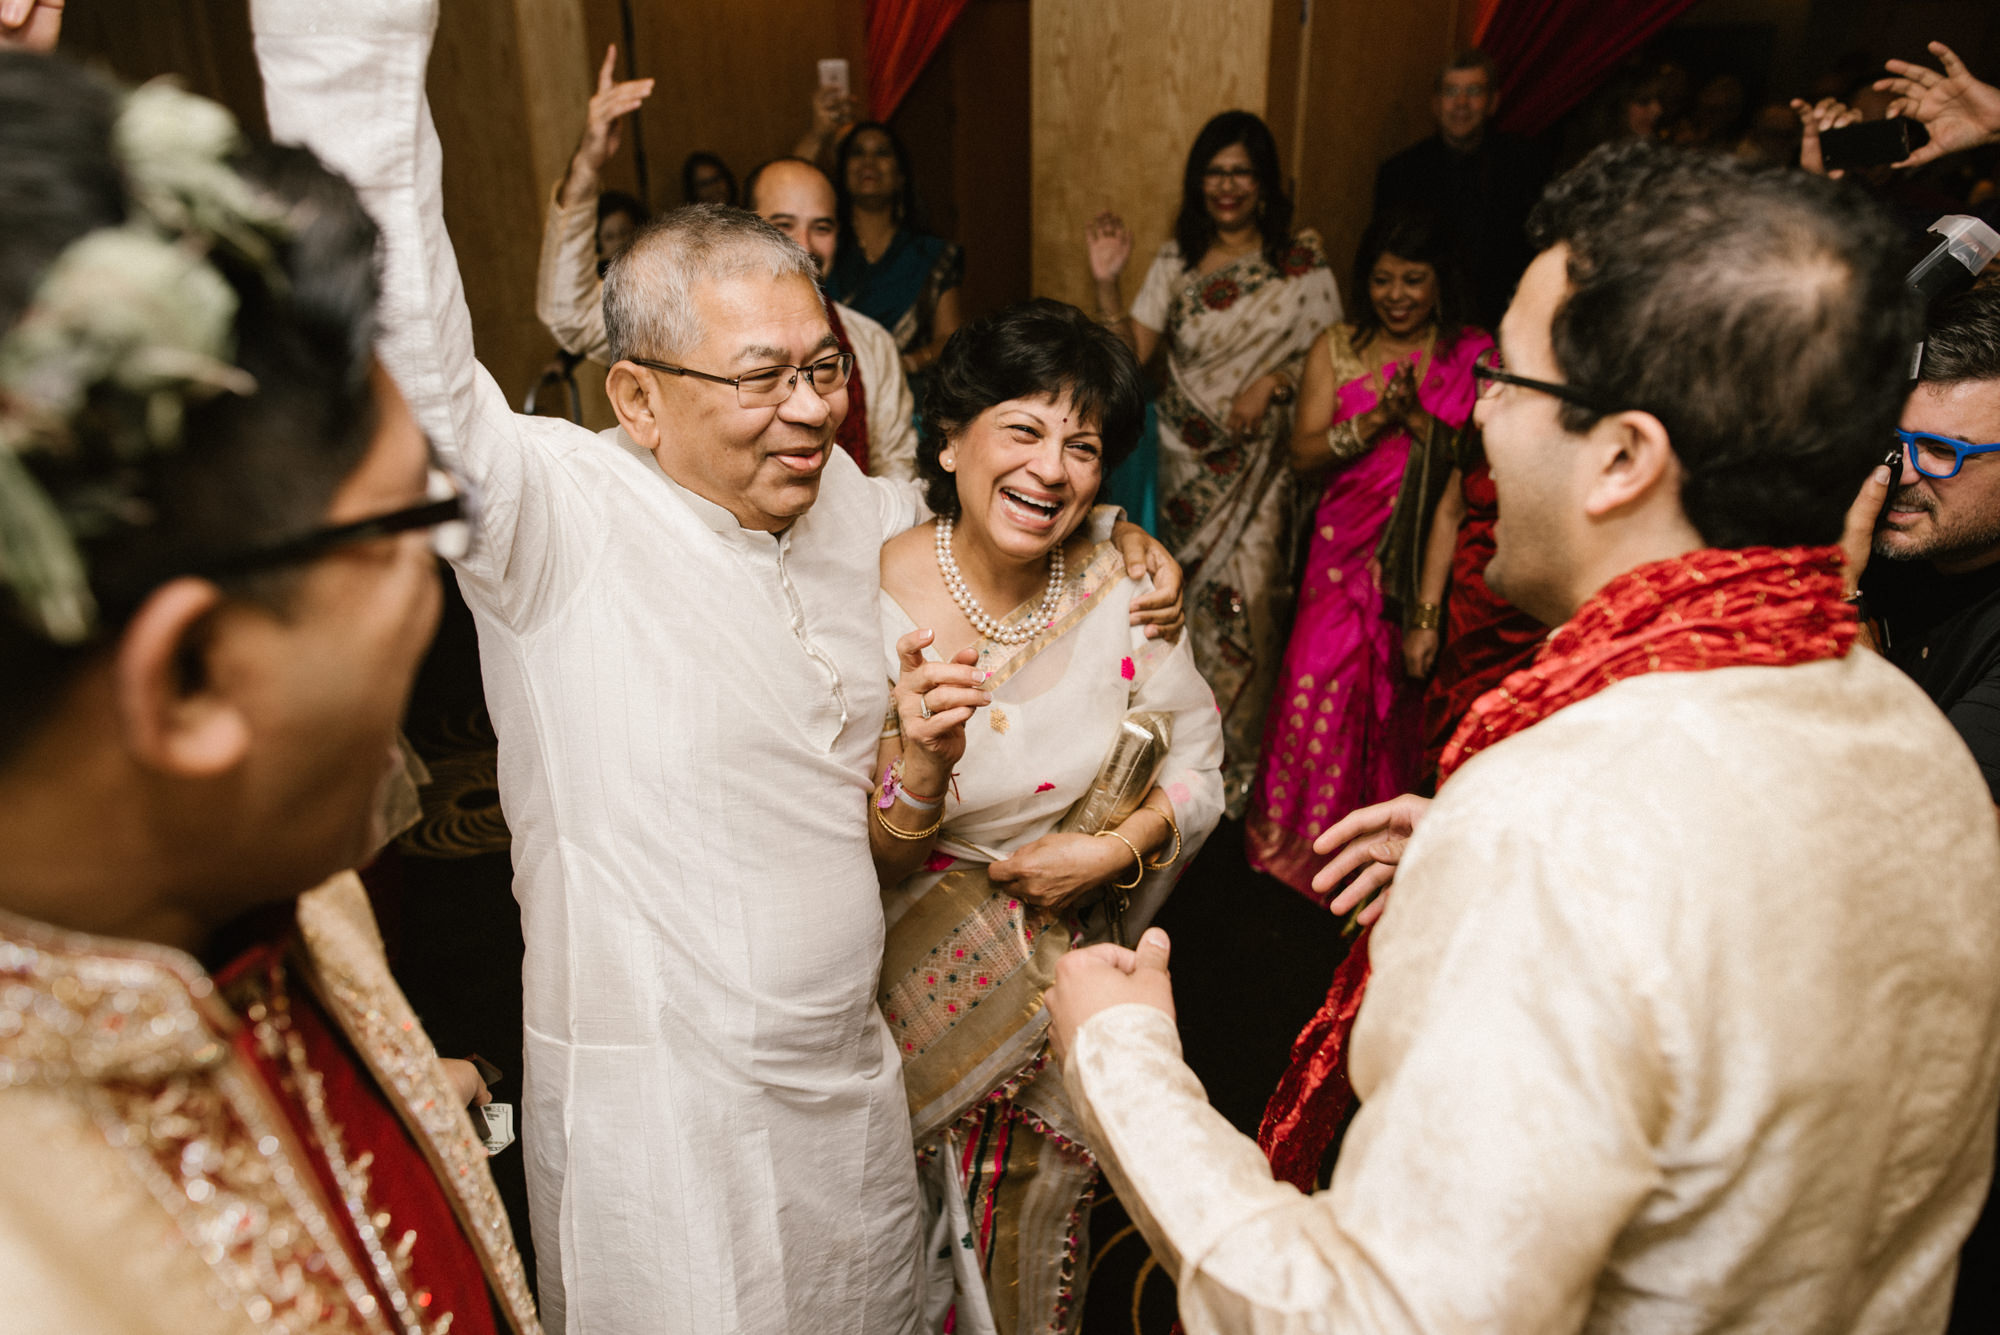 Neel's parents join the celebration and arrival of their son to his Hindu wedding at the Four Seasons.